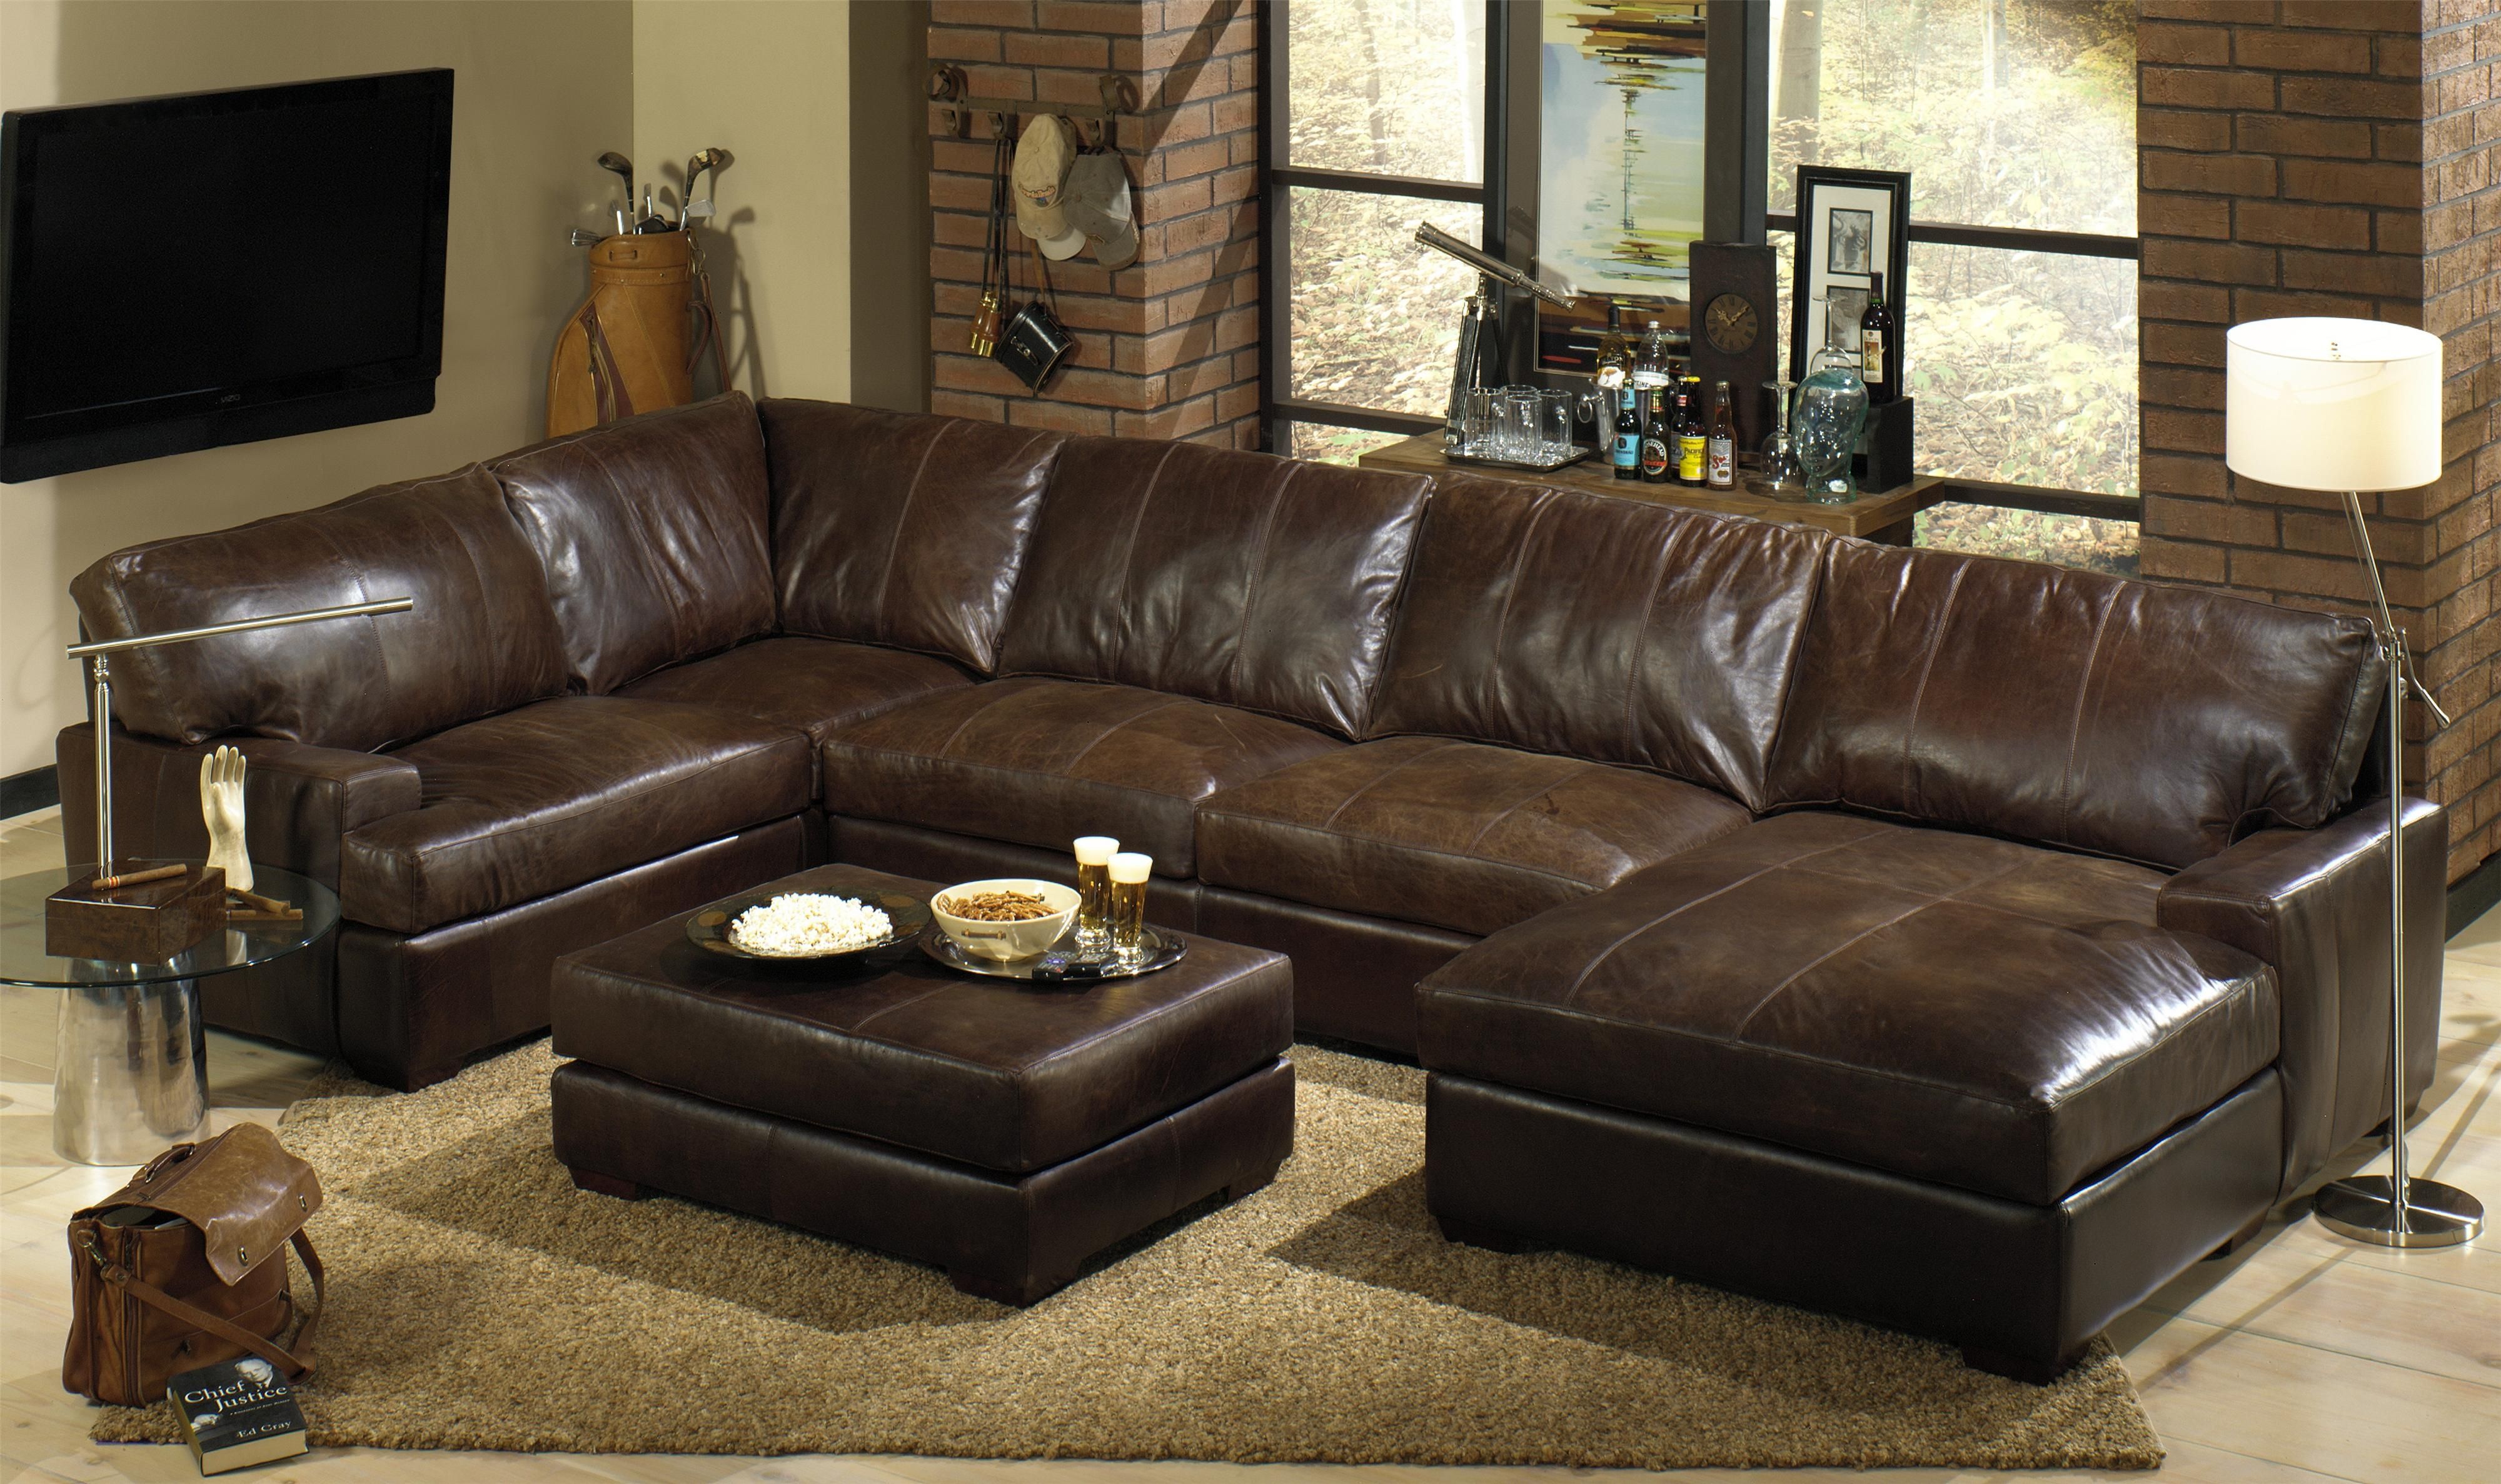 Cozy 6 Piece Leather Sectional Sofa 80 With Additional Camel In Camel Colored Sectional Sofa (View 12 of 12)